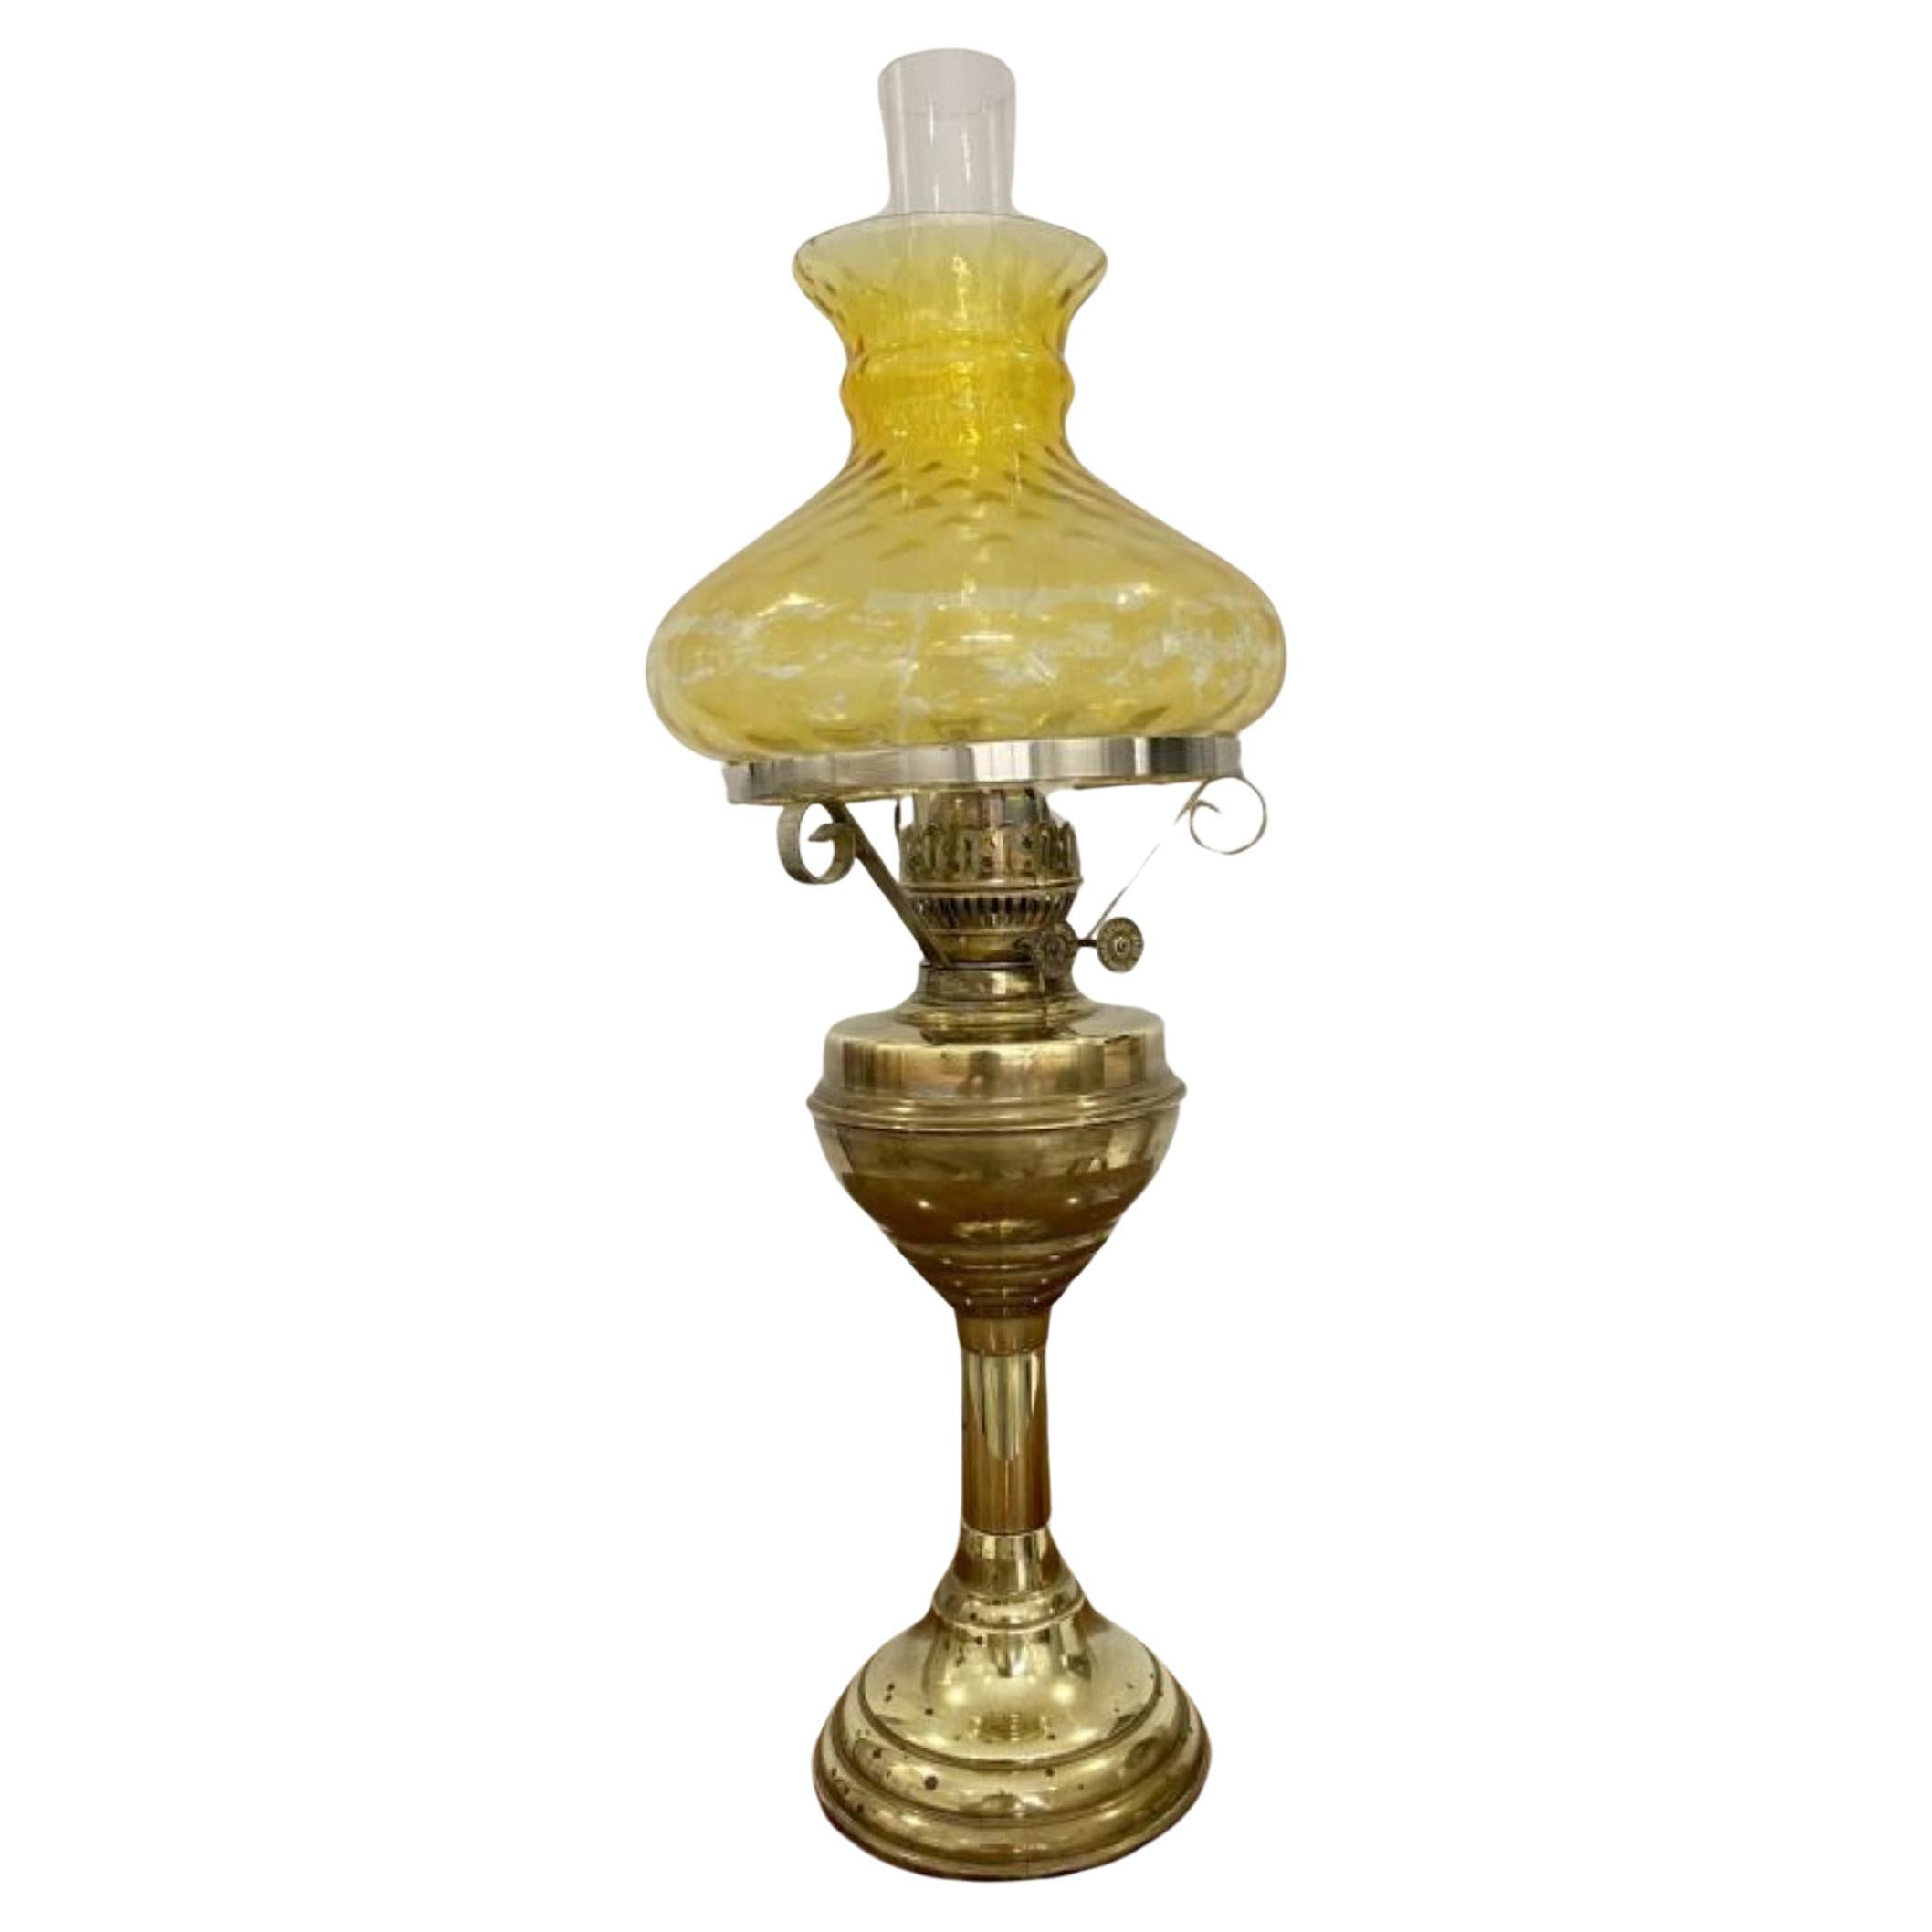 How do you use a brass oil lamp?